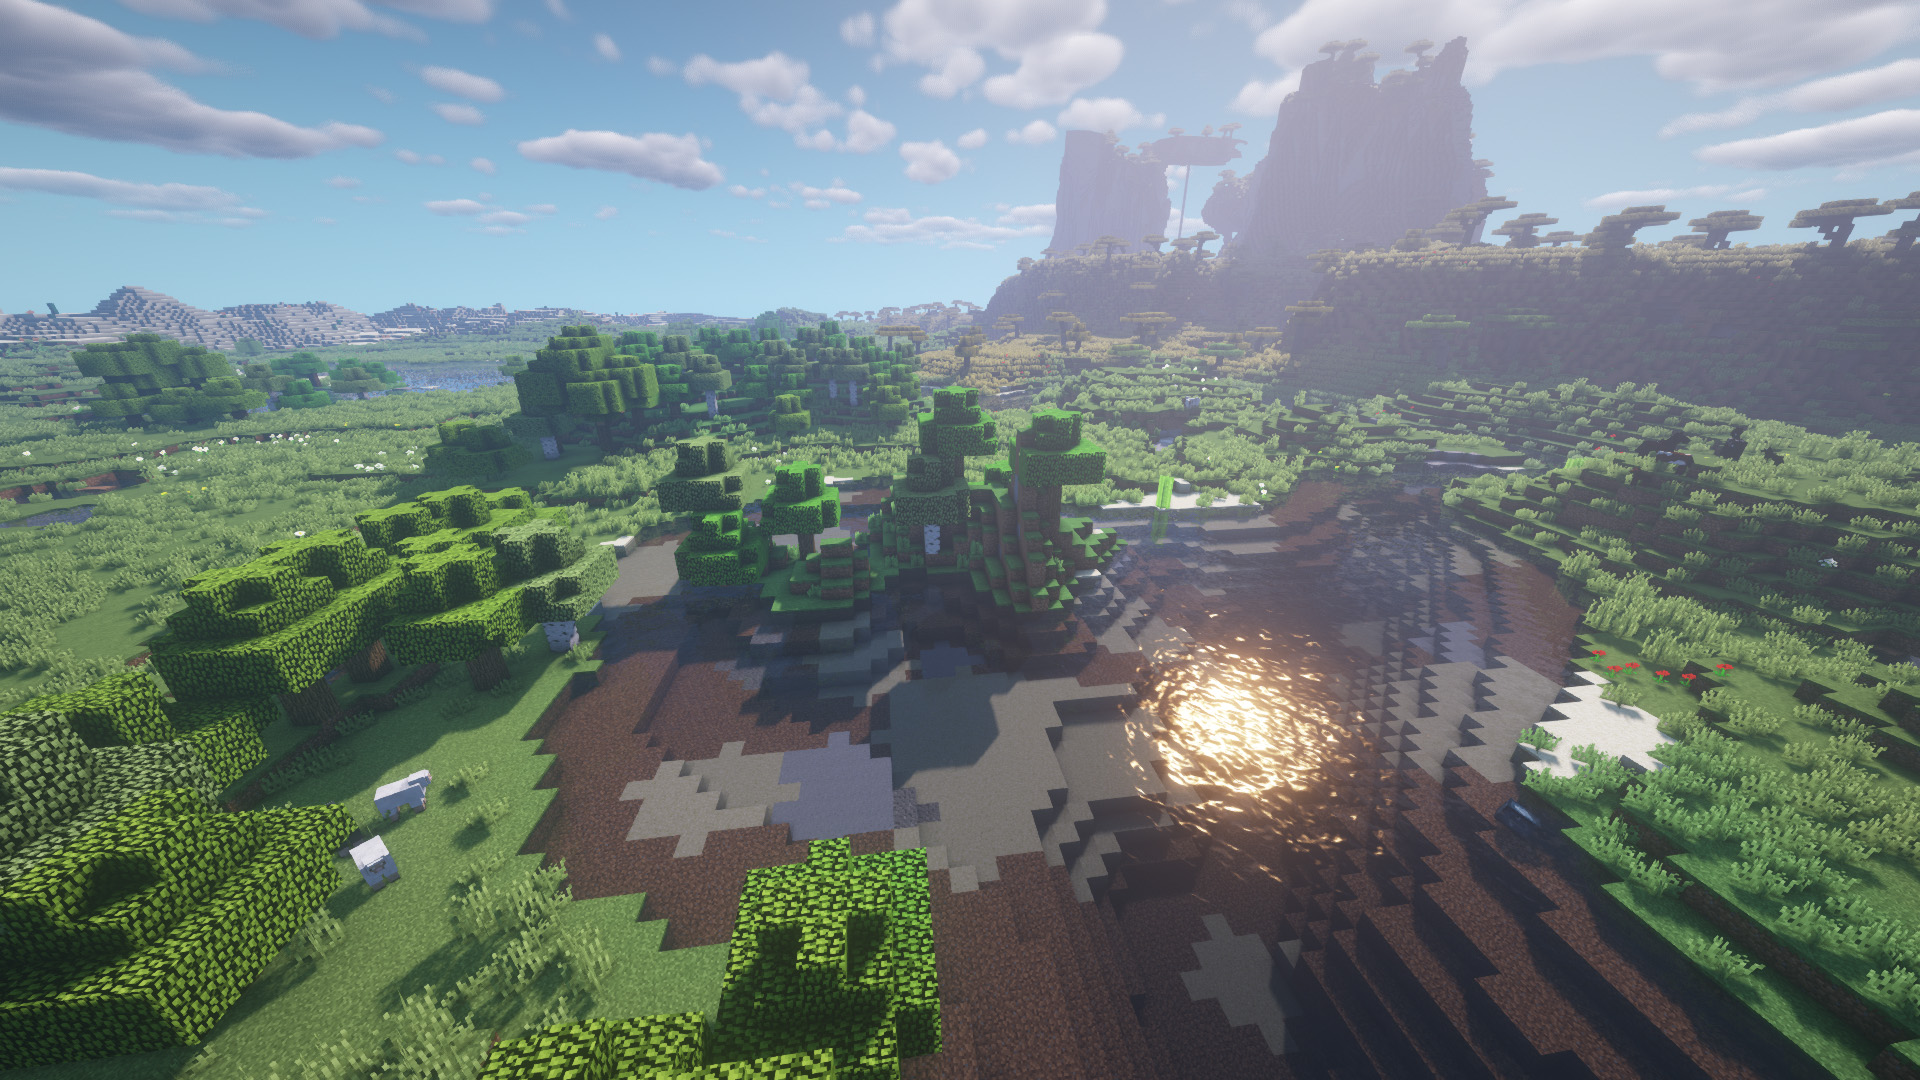 Update the shaders